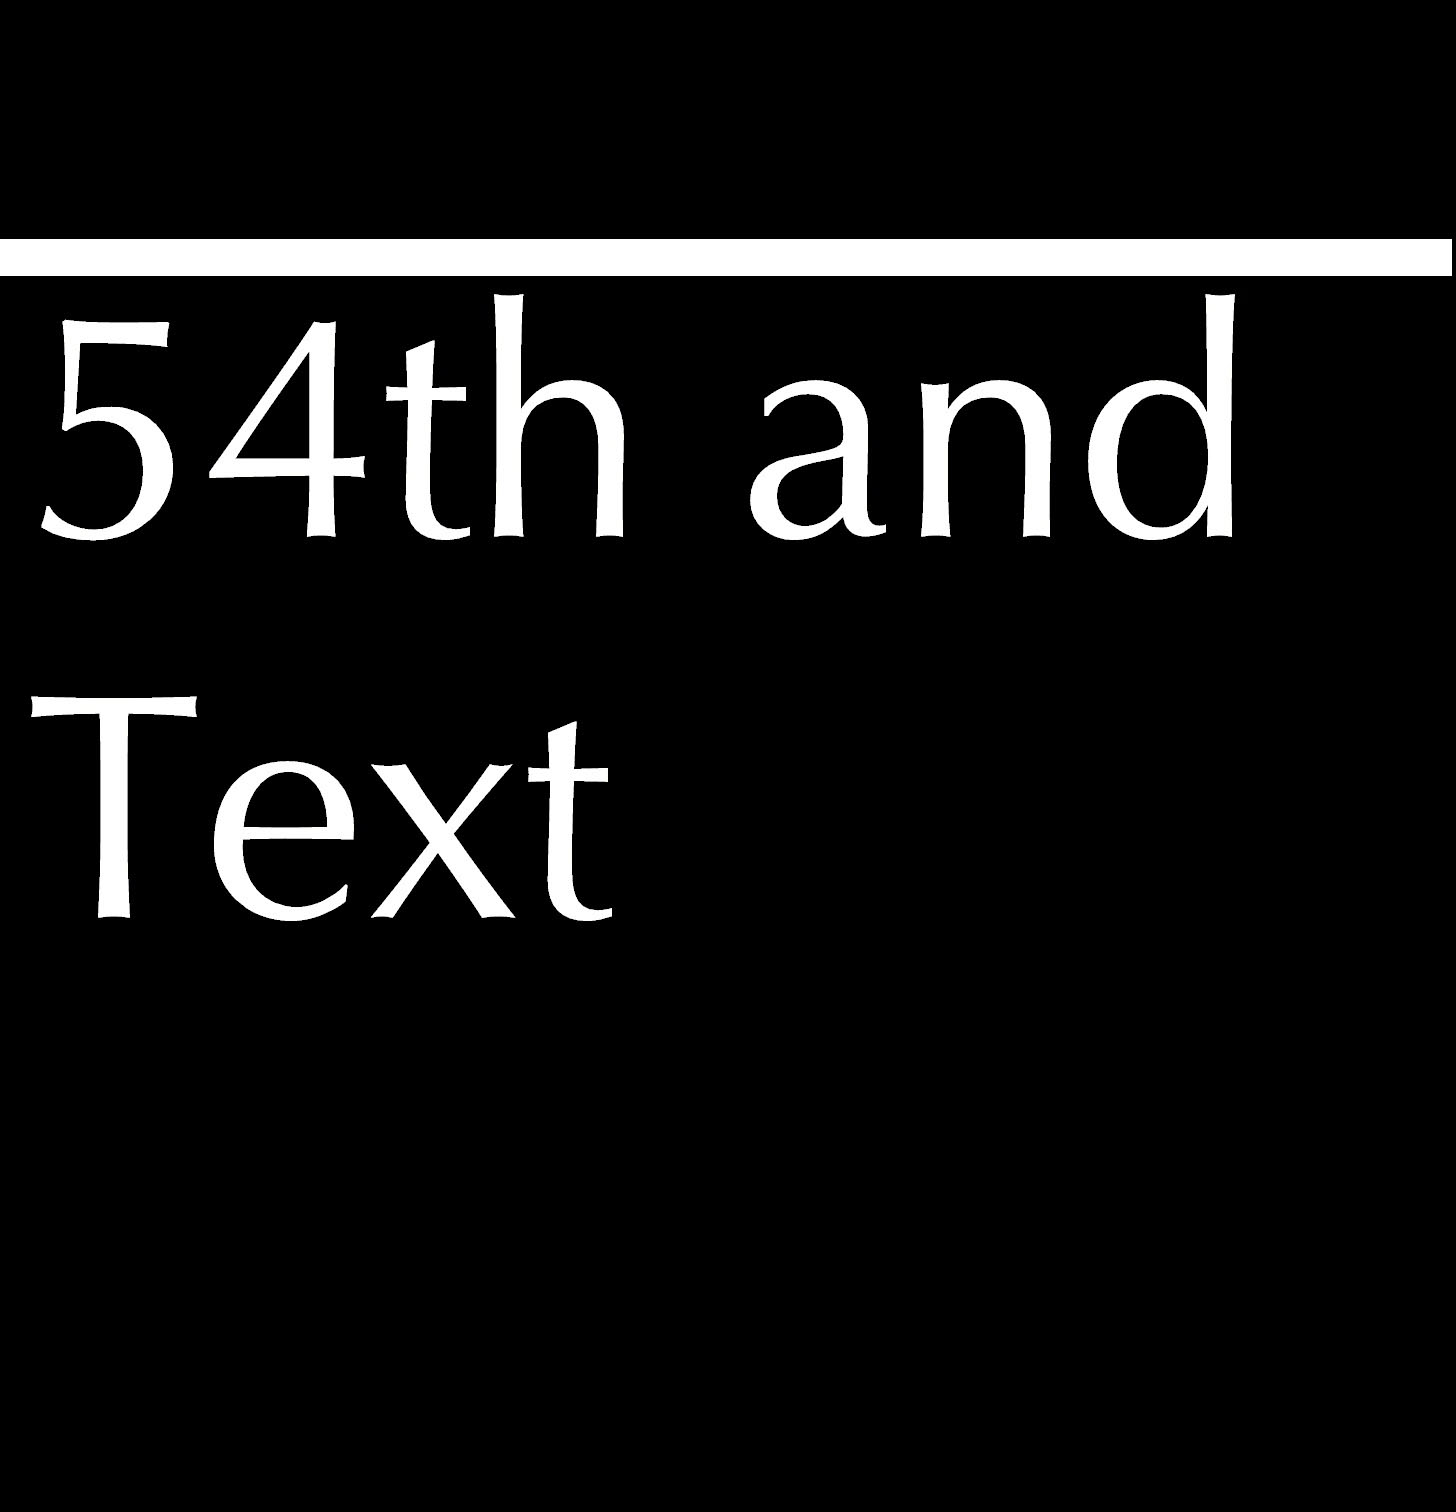 54th and Text